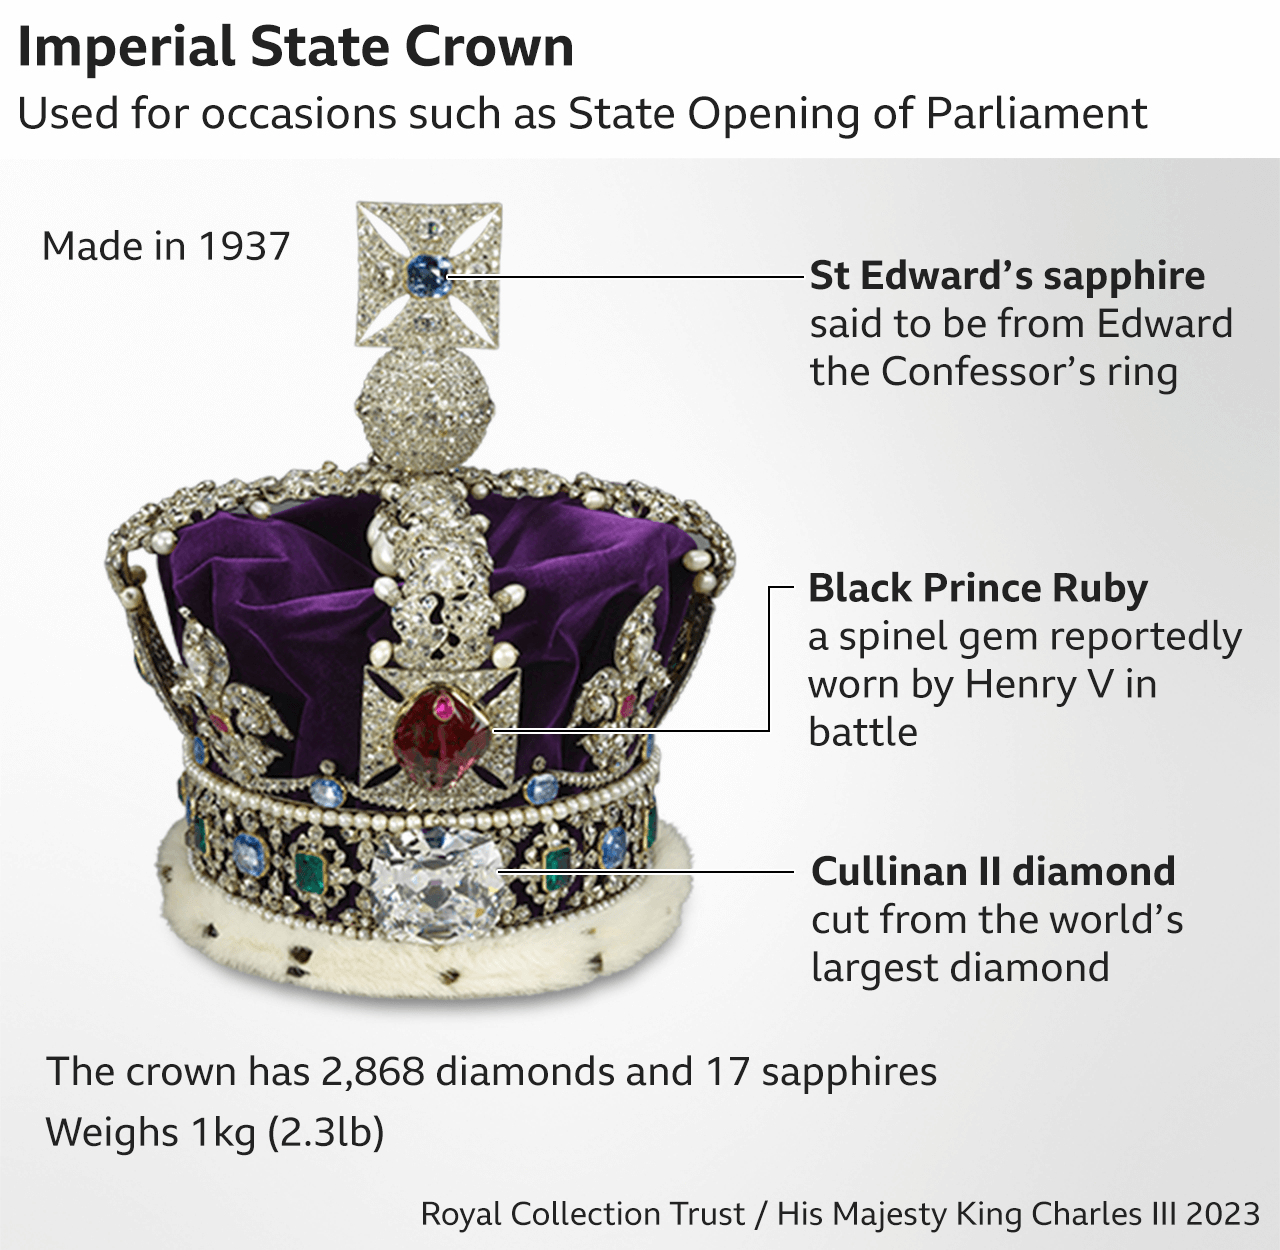 Graphic of Imperial State Crown and highlighting the St Edward's sapphire (said to be from Edward the Confessor's ring), the Black Prince Ruby (reportedly worn by Henry V in battle) and the Cullinan II diamond